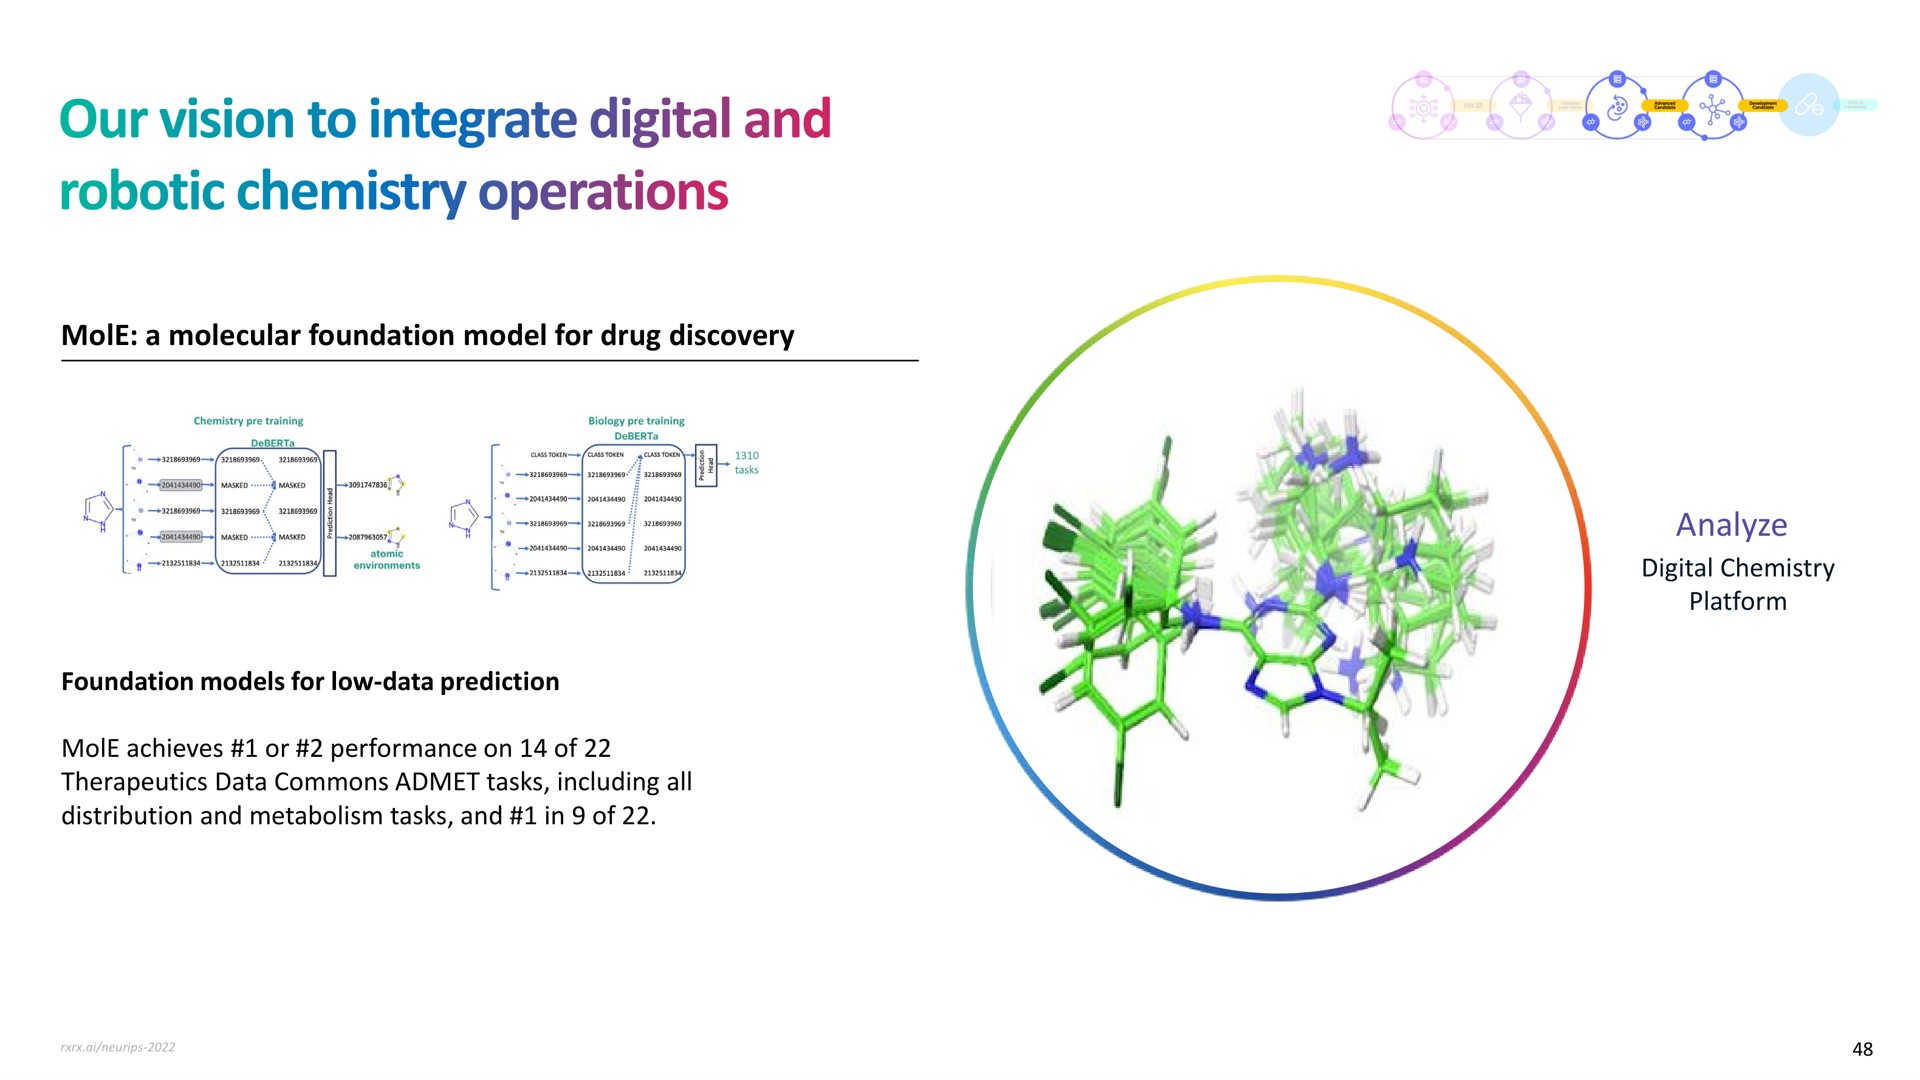 mole a molecular foundation model for drug discovery analyze our vision to integrate digital and chemistry operations | Recursion Pharmaceuticals